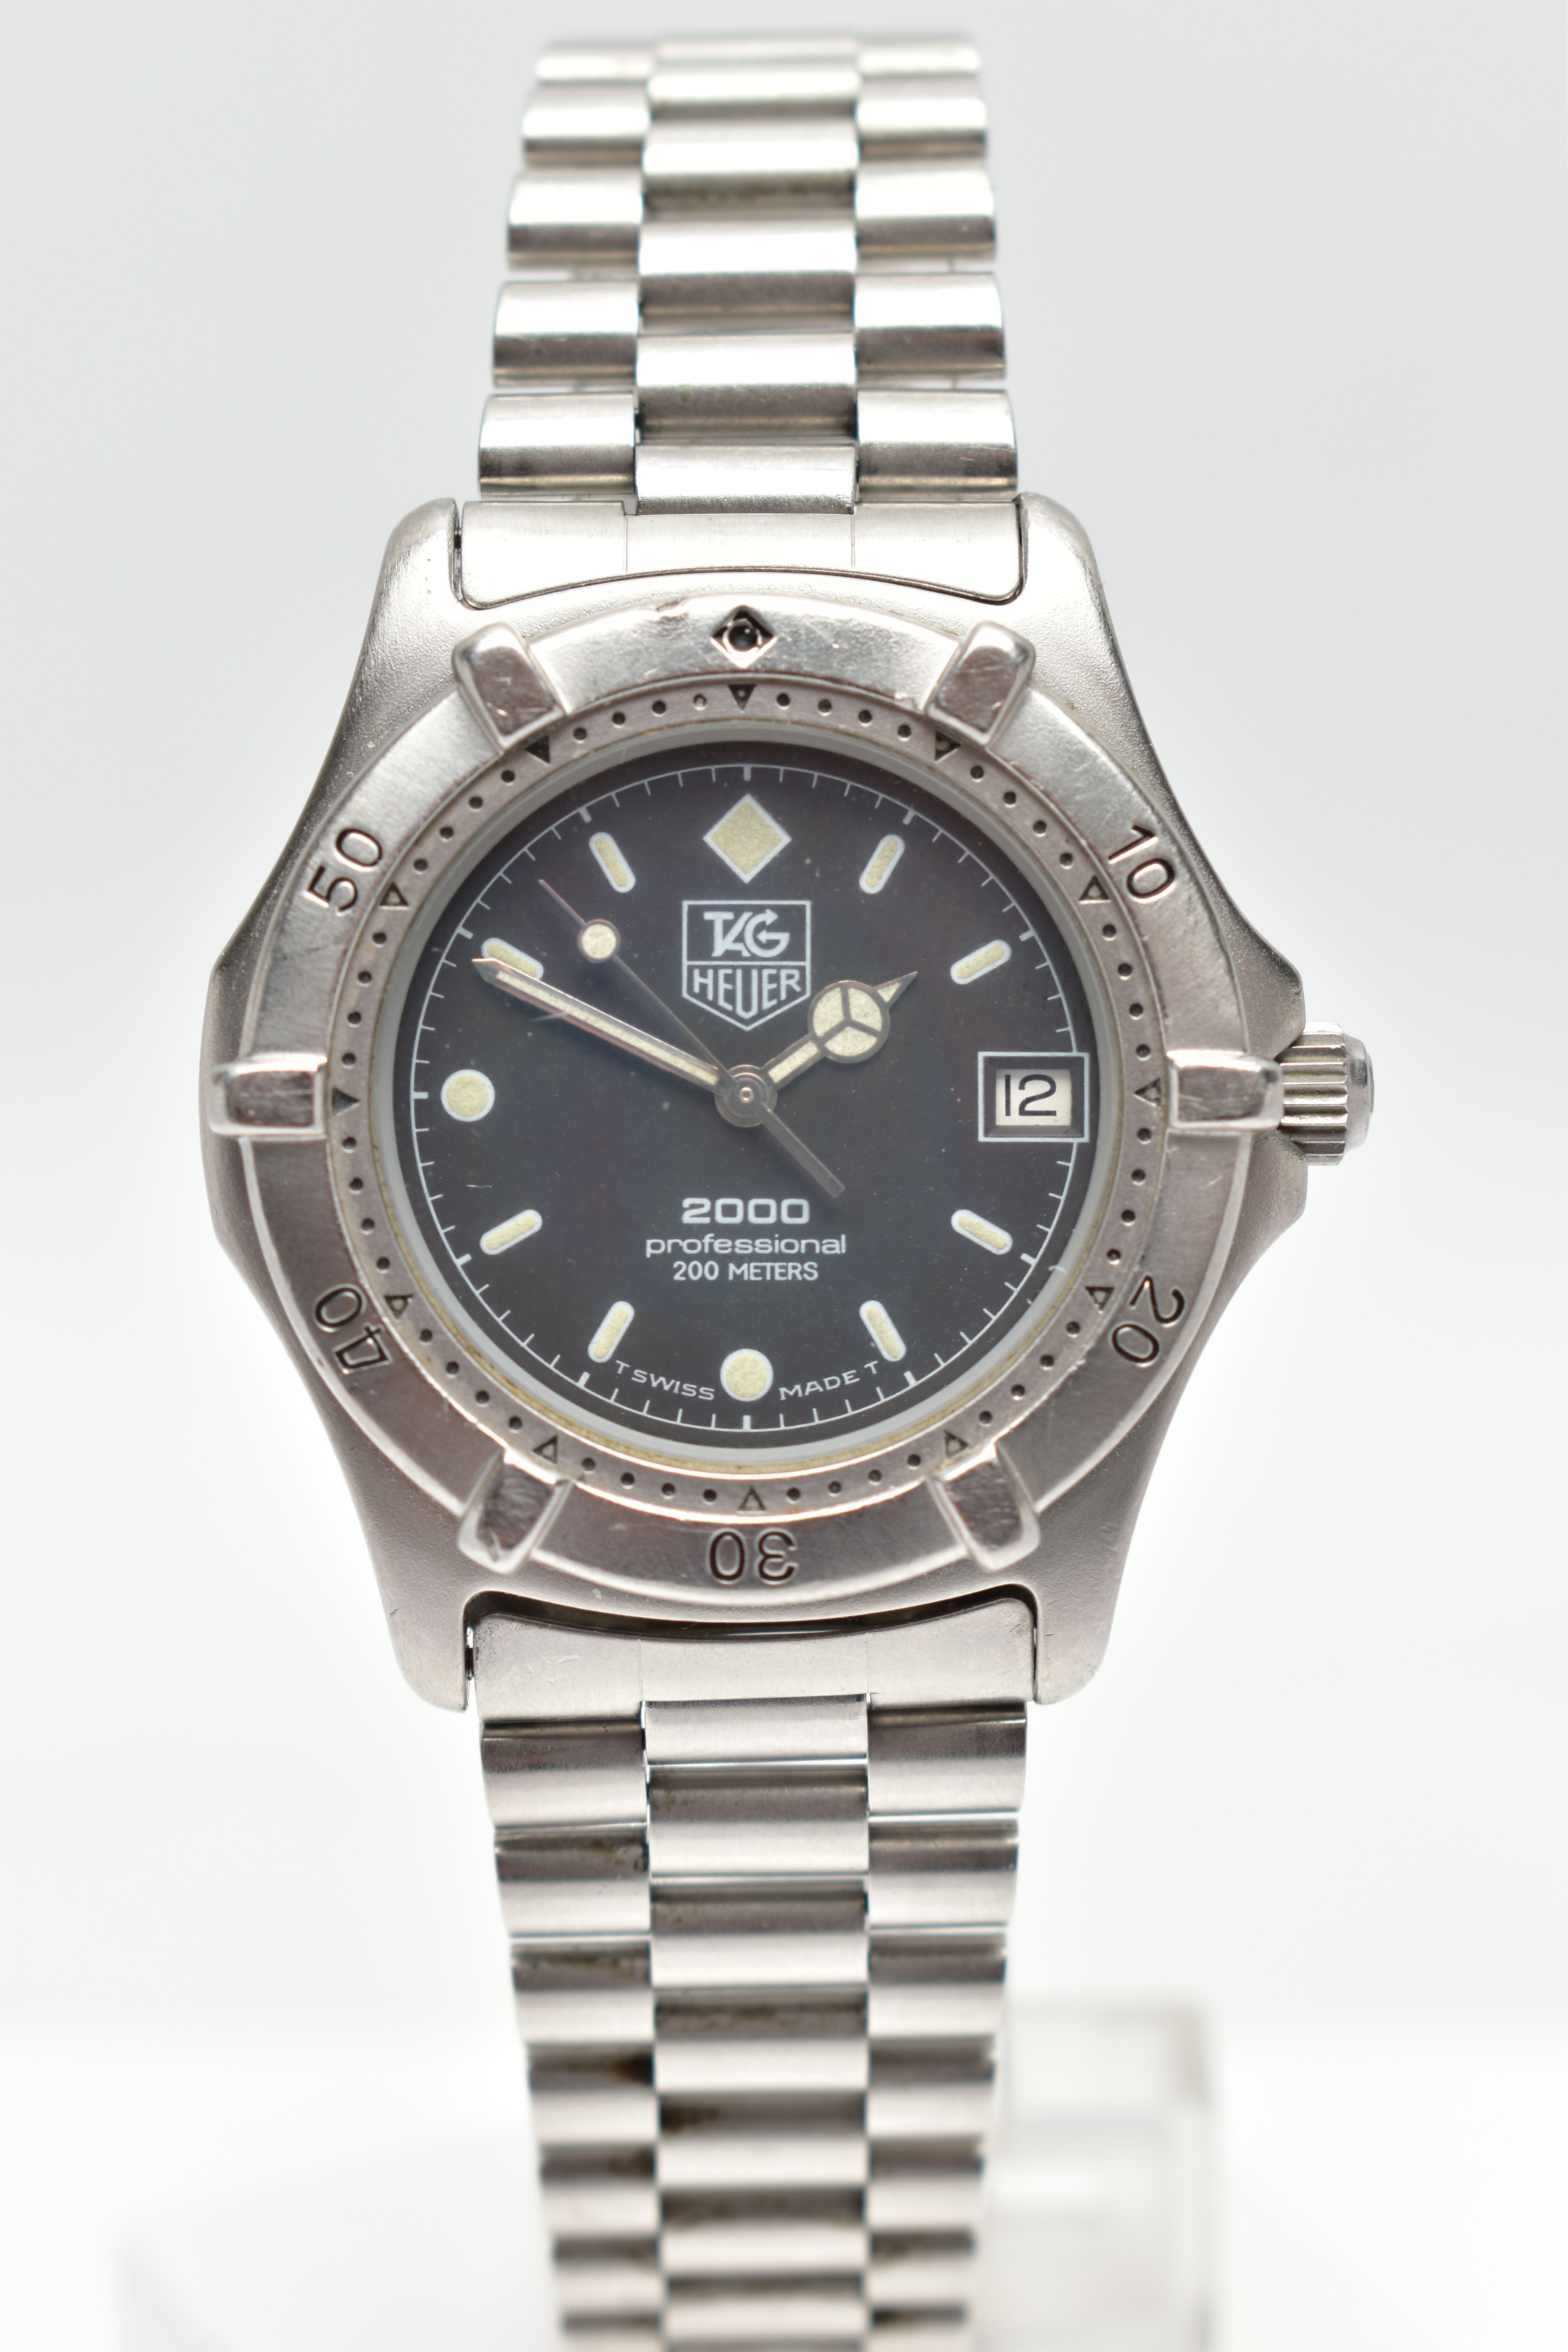 A 'TAG HEUER' QUARTZ WRISTWATCH, round black dial signed 'Tag Heuer, 2000 professional 200